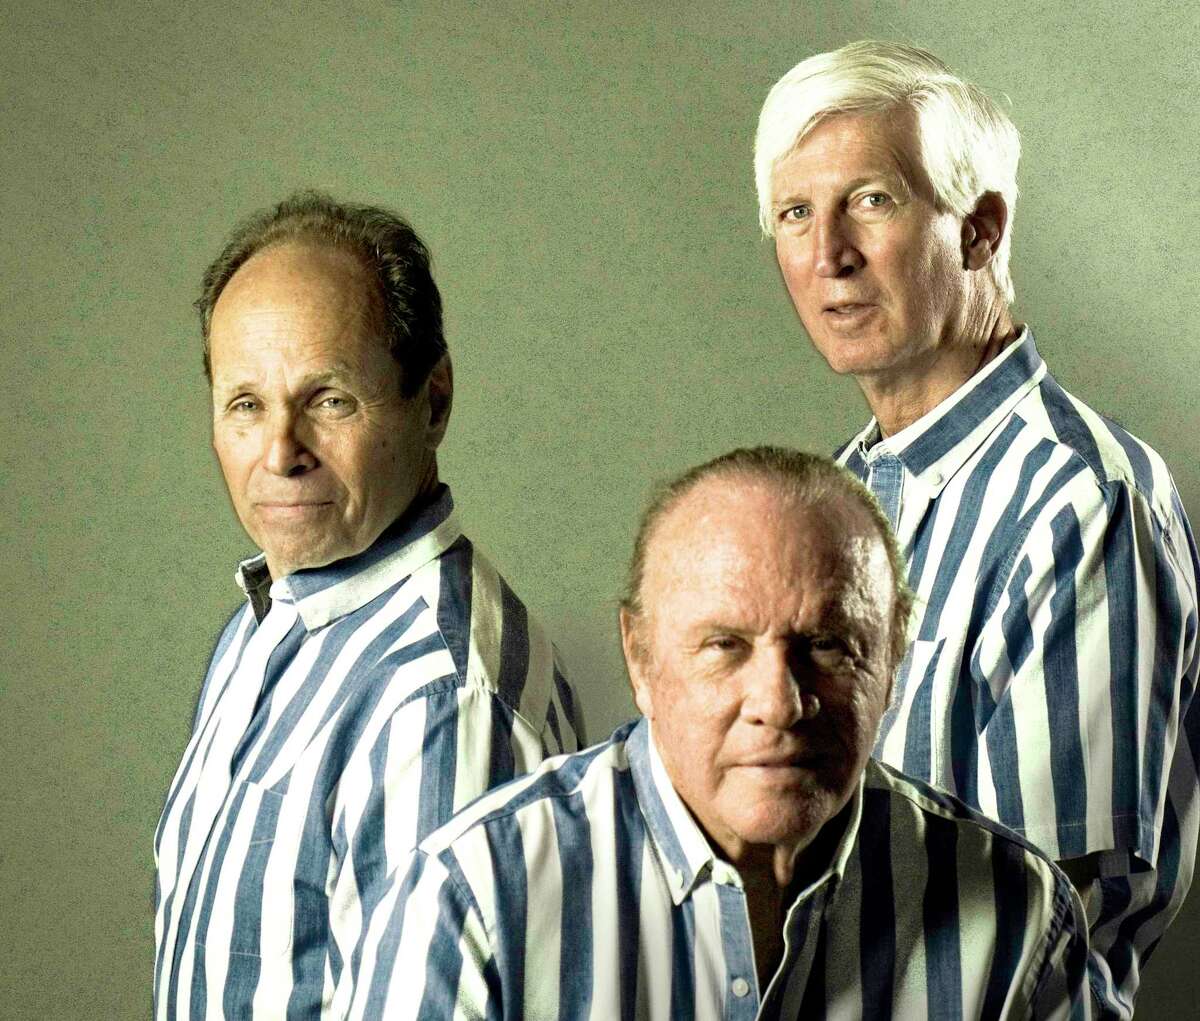 The Kingston Trio will be performing at The Katharine Hepburn Cultural Arts Center in Old Saybrook Nov. 6 and 7.